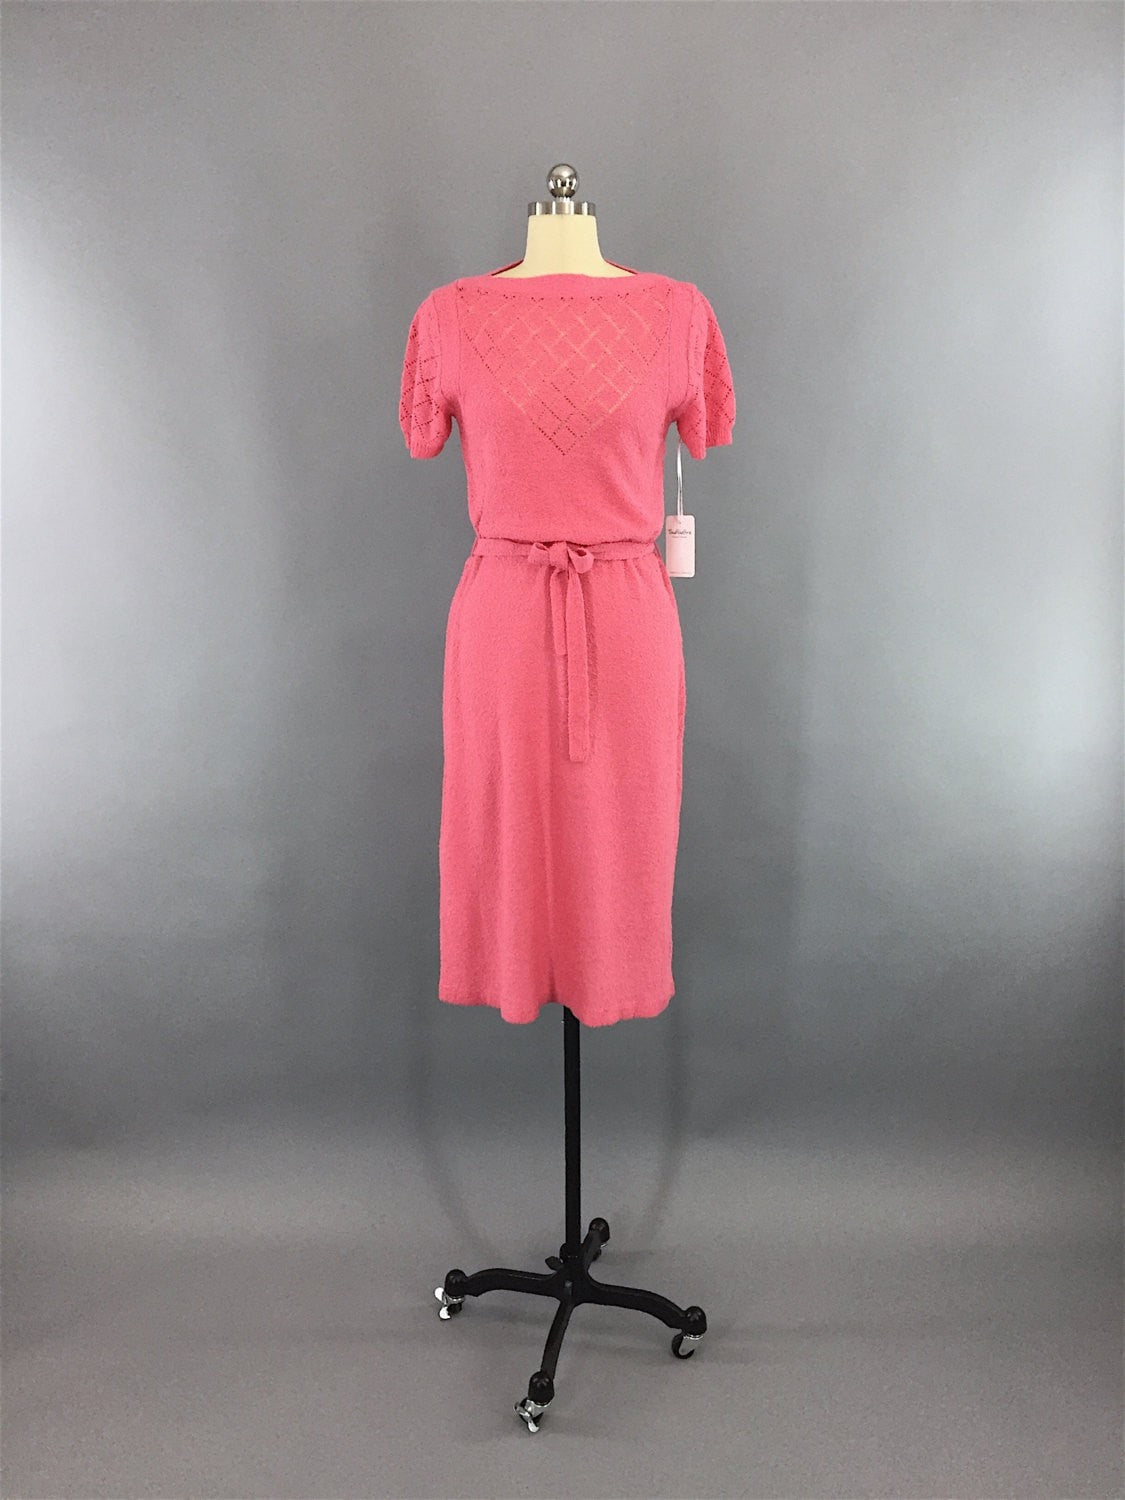 1980s Vintage Carnation Pink Knit Sweater Dress - ThisBlueBird